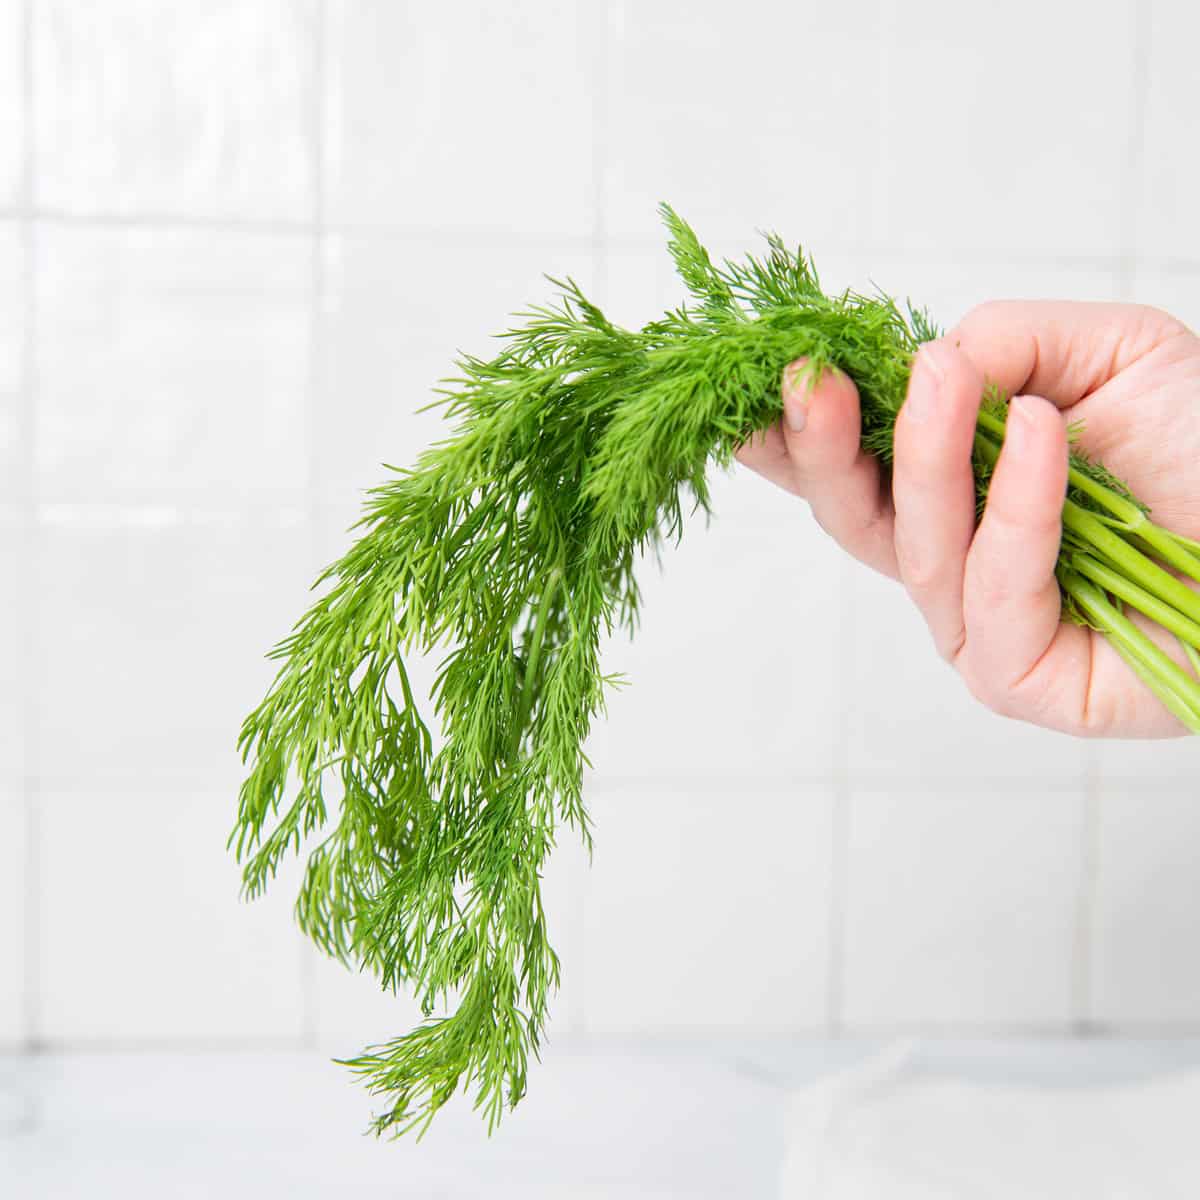 Bunch of dill in a hand.